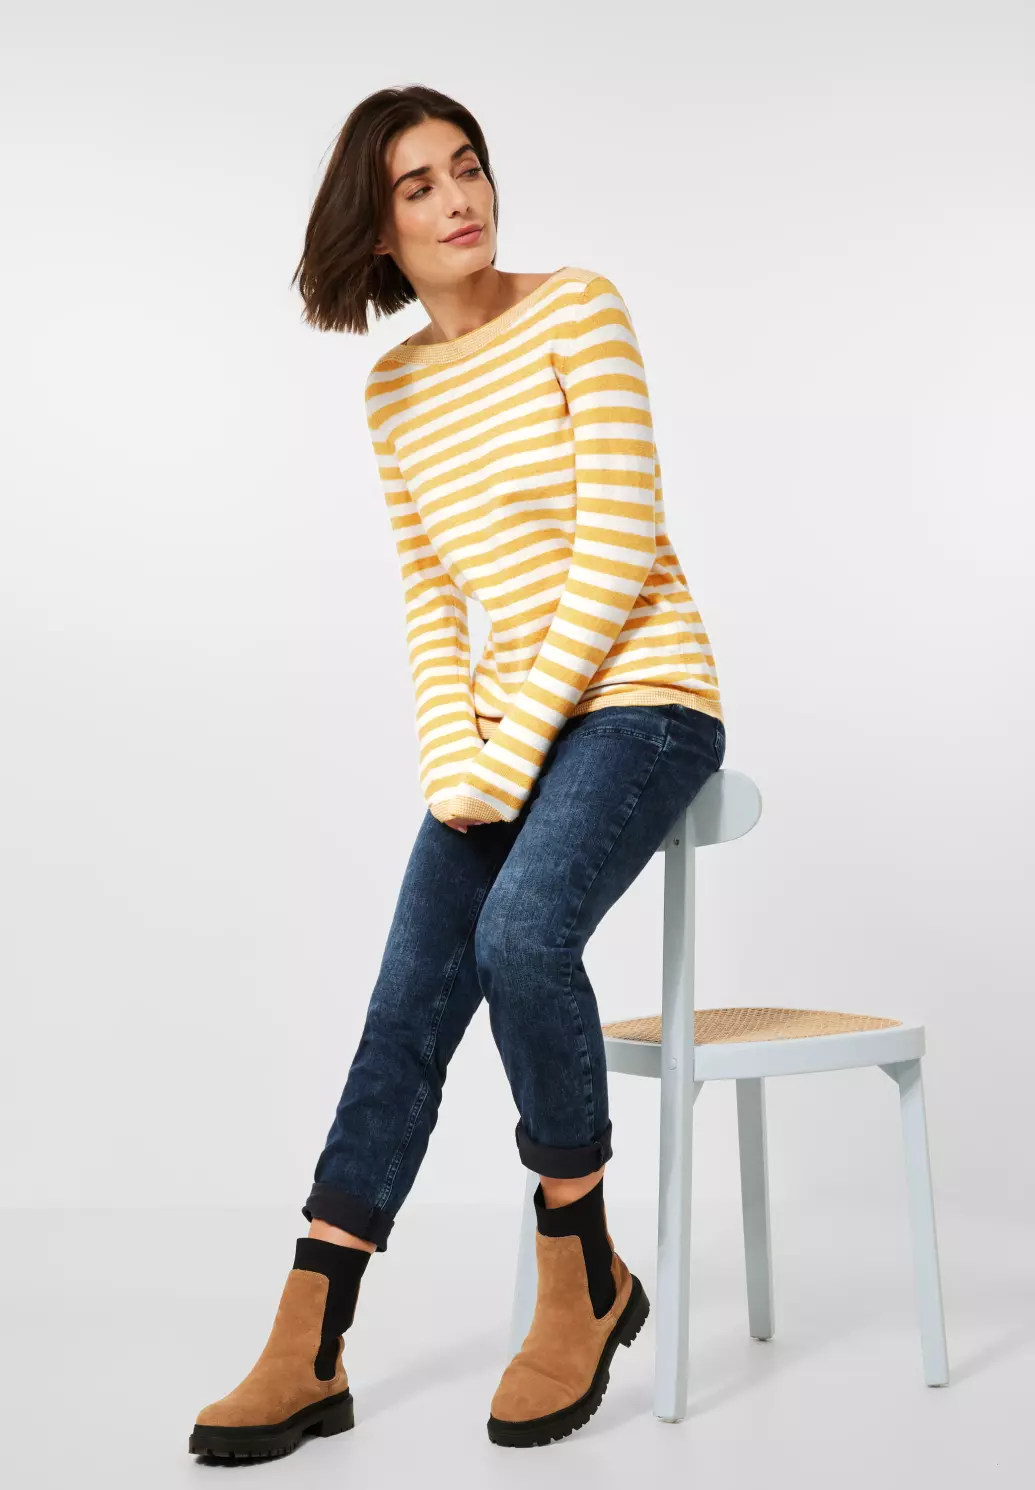 CECIL Cosy Streifenpullover - Curry Yellow / Gelb | - Cotton Blues